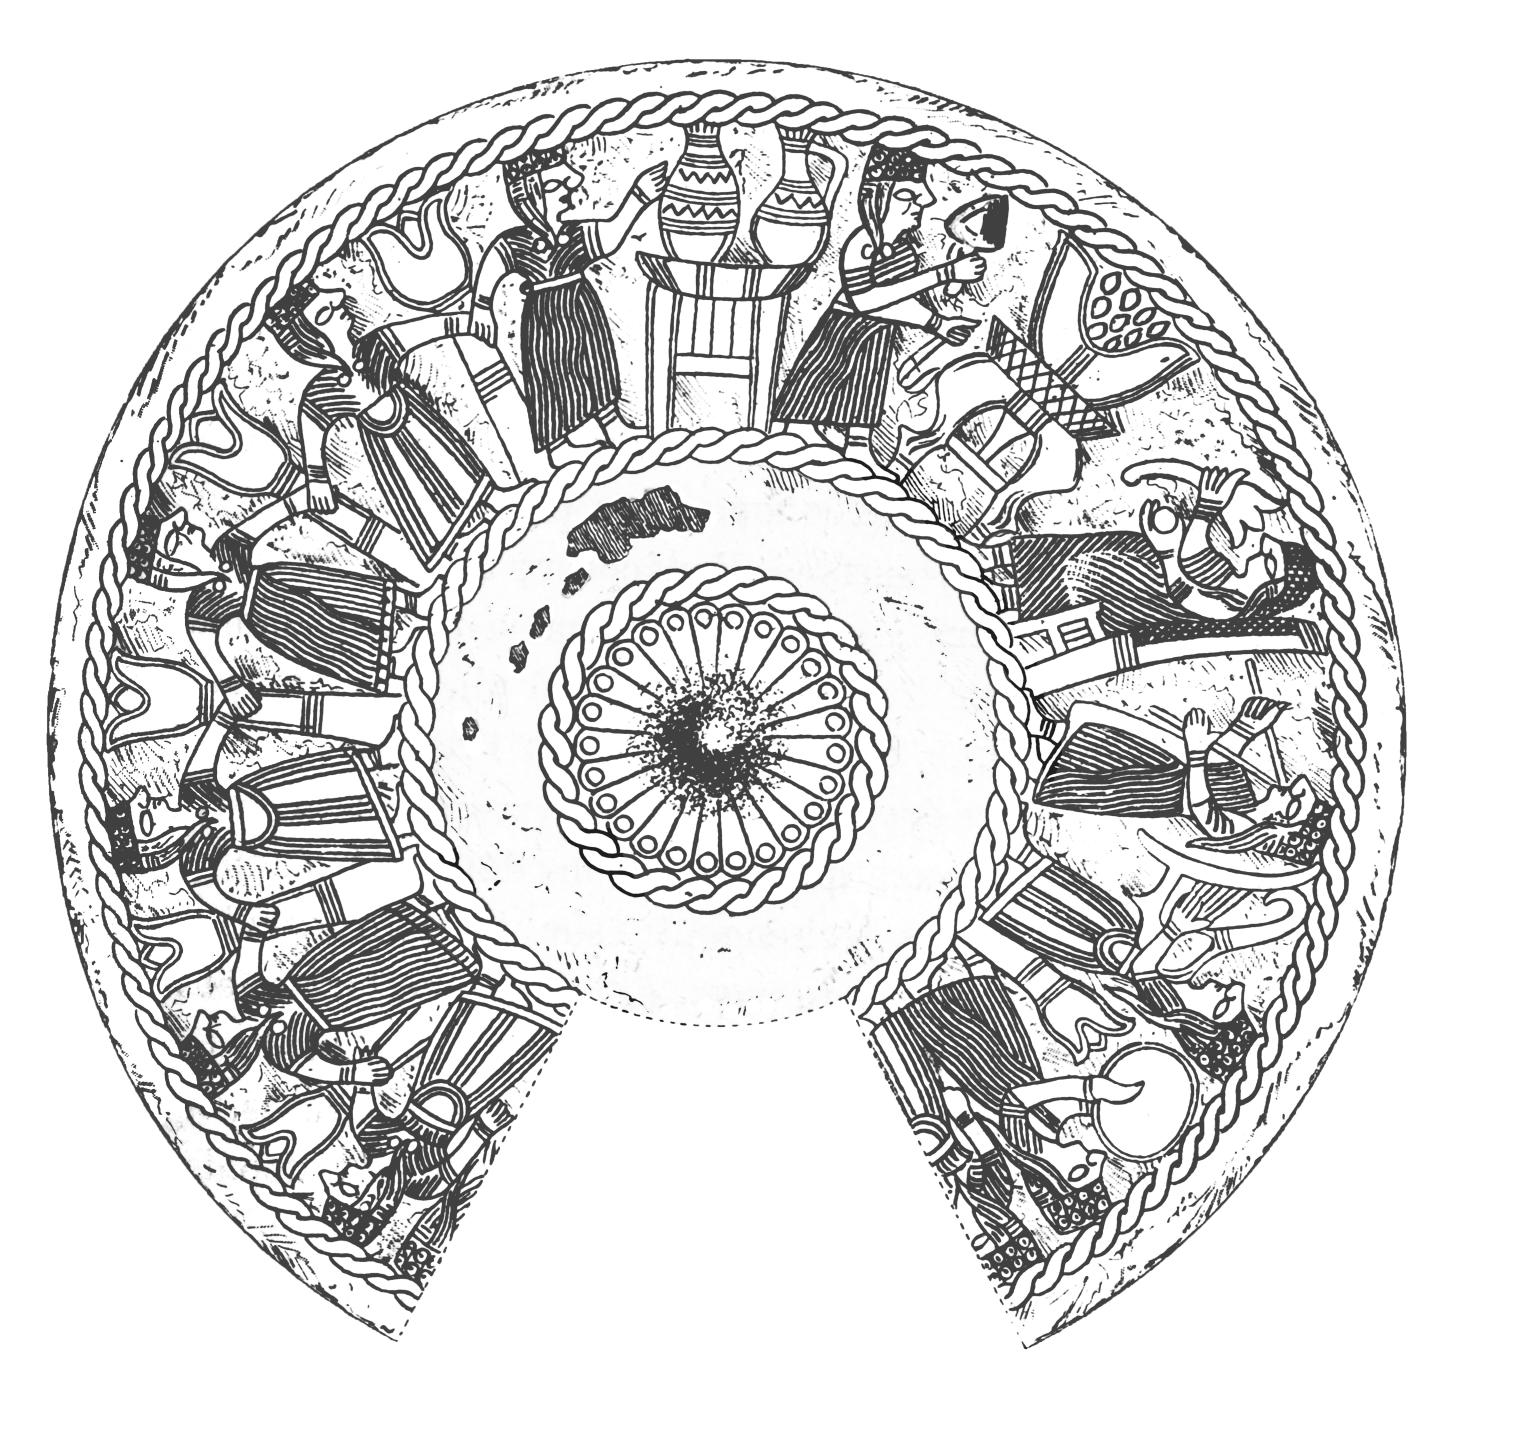 Drawing of interior of bowl with scene of seated woman and three female musicians playing a double pipe, lyre, and a frame drum or cymbals, and several women holding hands and dancing.